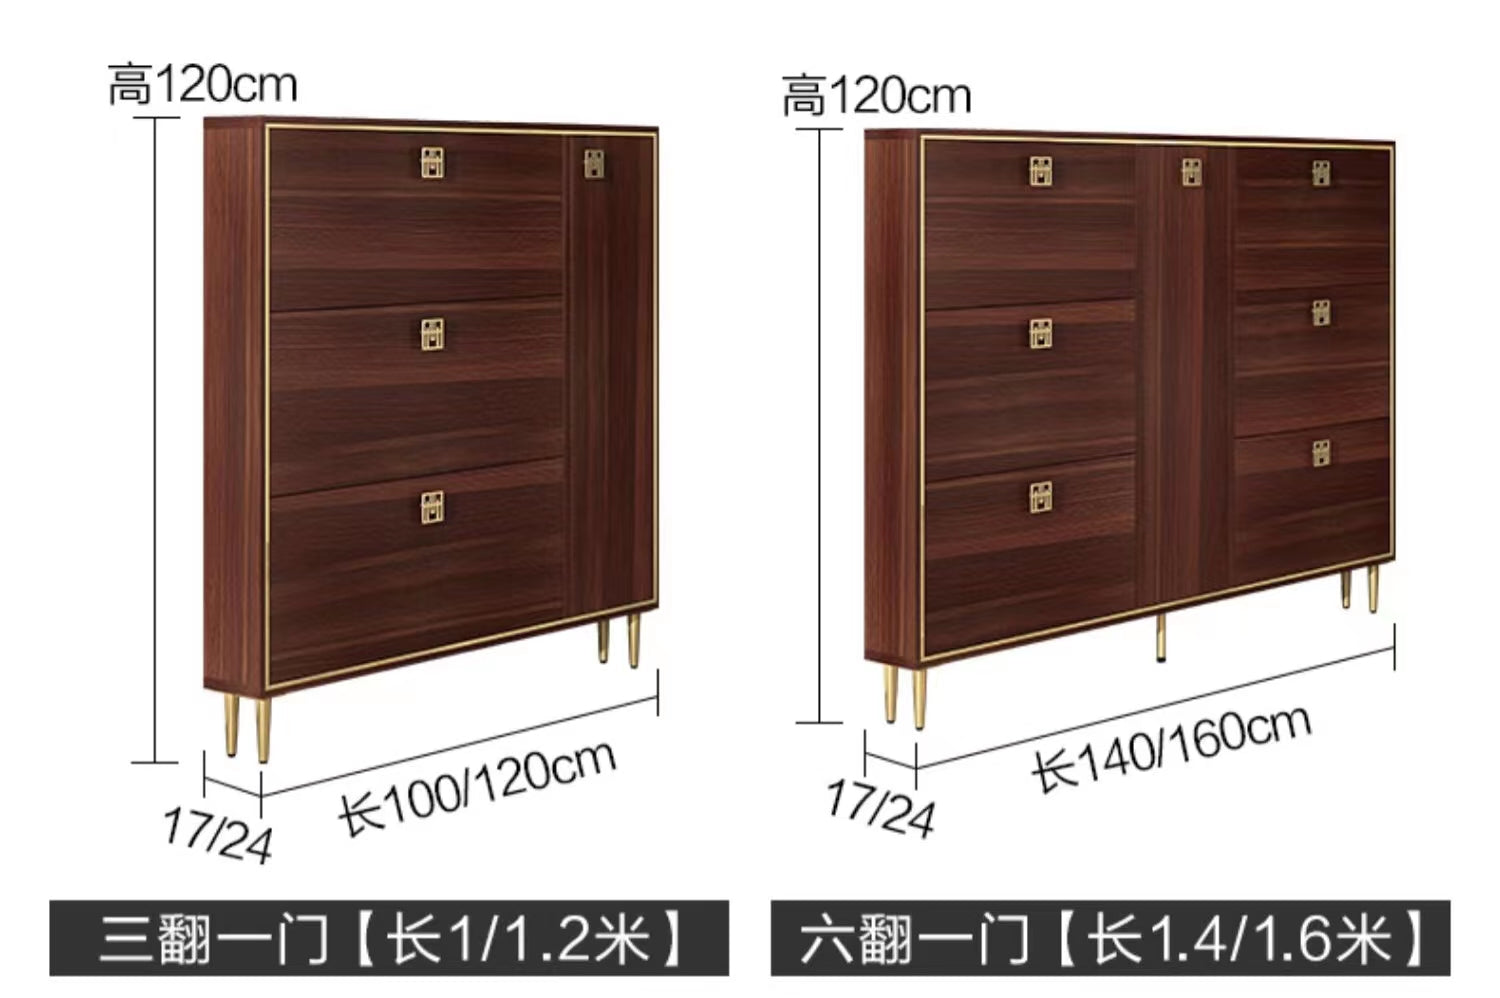 18-36 Pairs Shoes Storage Cabinet - 4 Seasons Home Gadgets